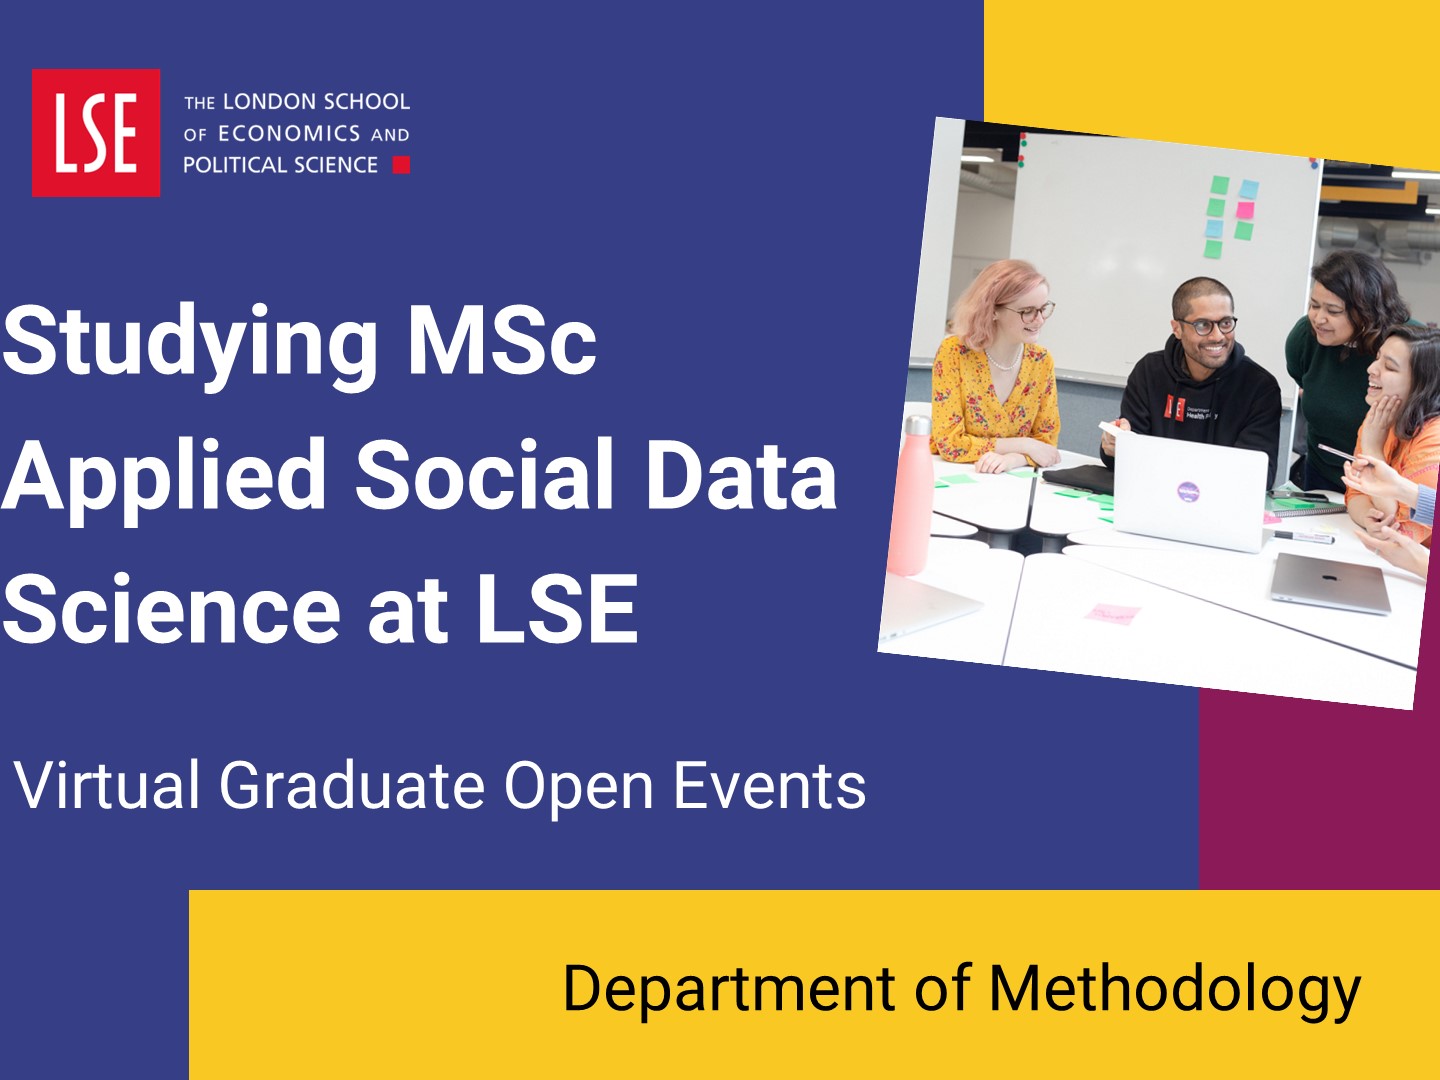 An introductio to studying MSc Applied Social Data Science at LSE